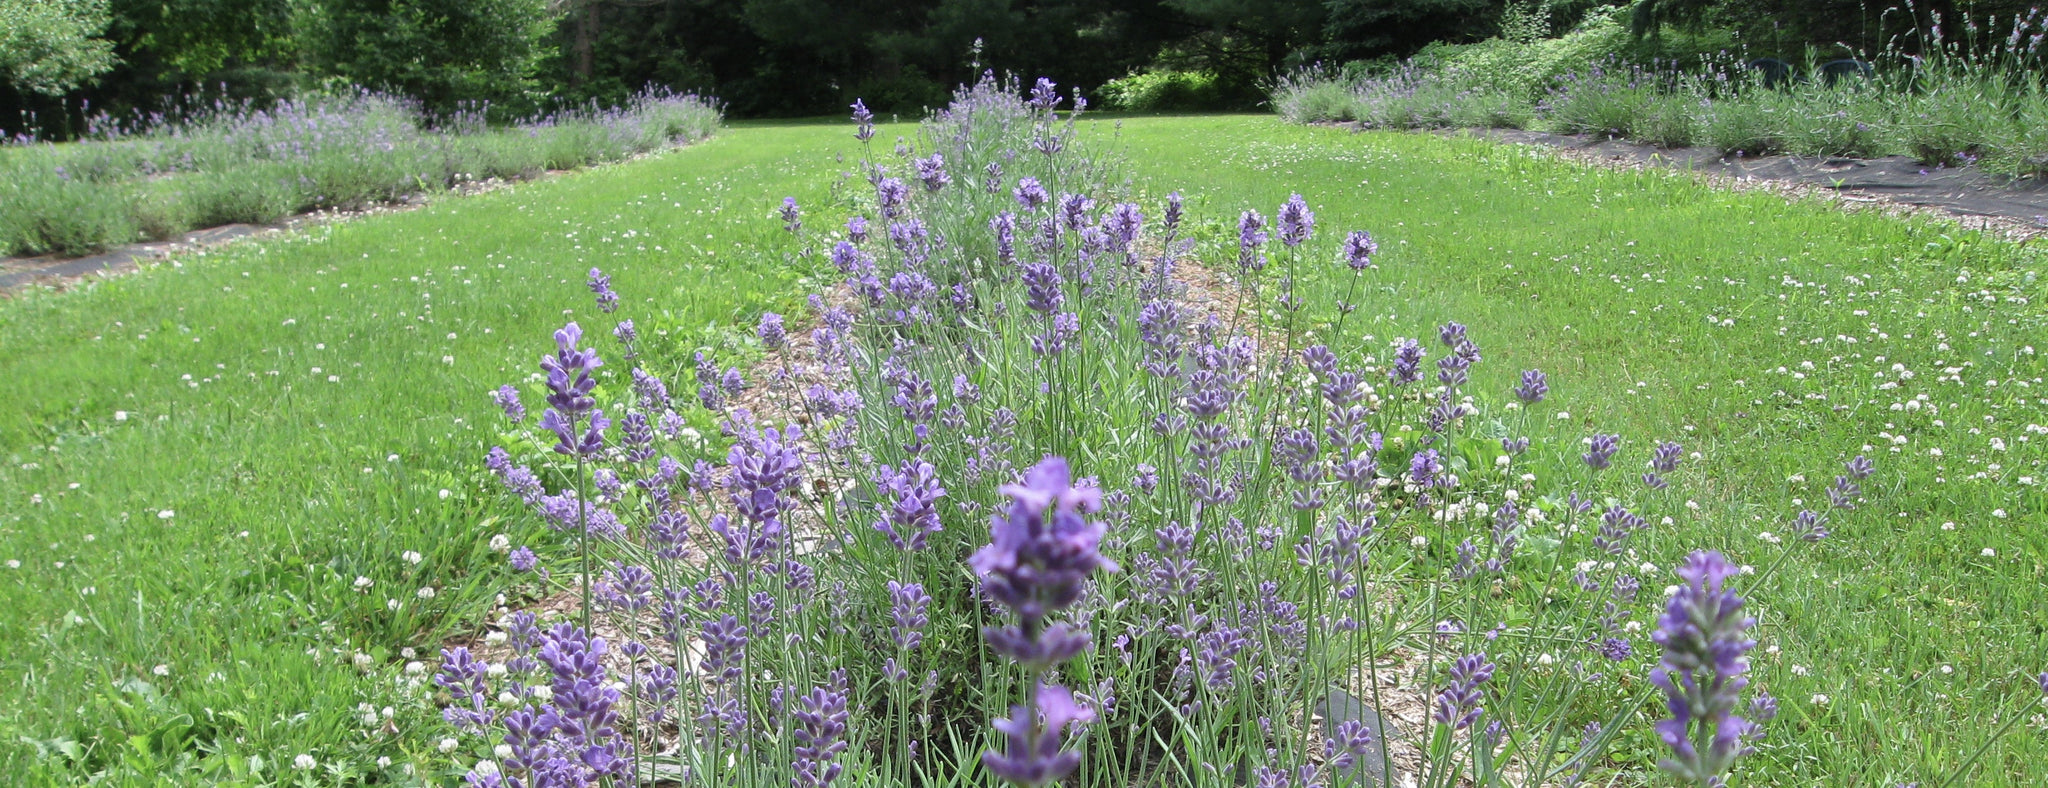 The importance of lavender - Garden Path Homemade Soap - Vankleek Hill Ontario Canada